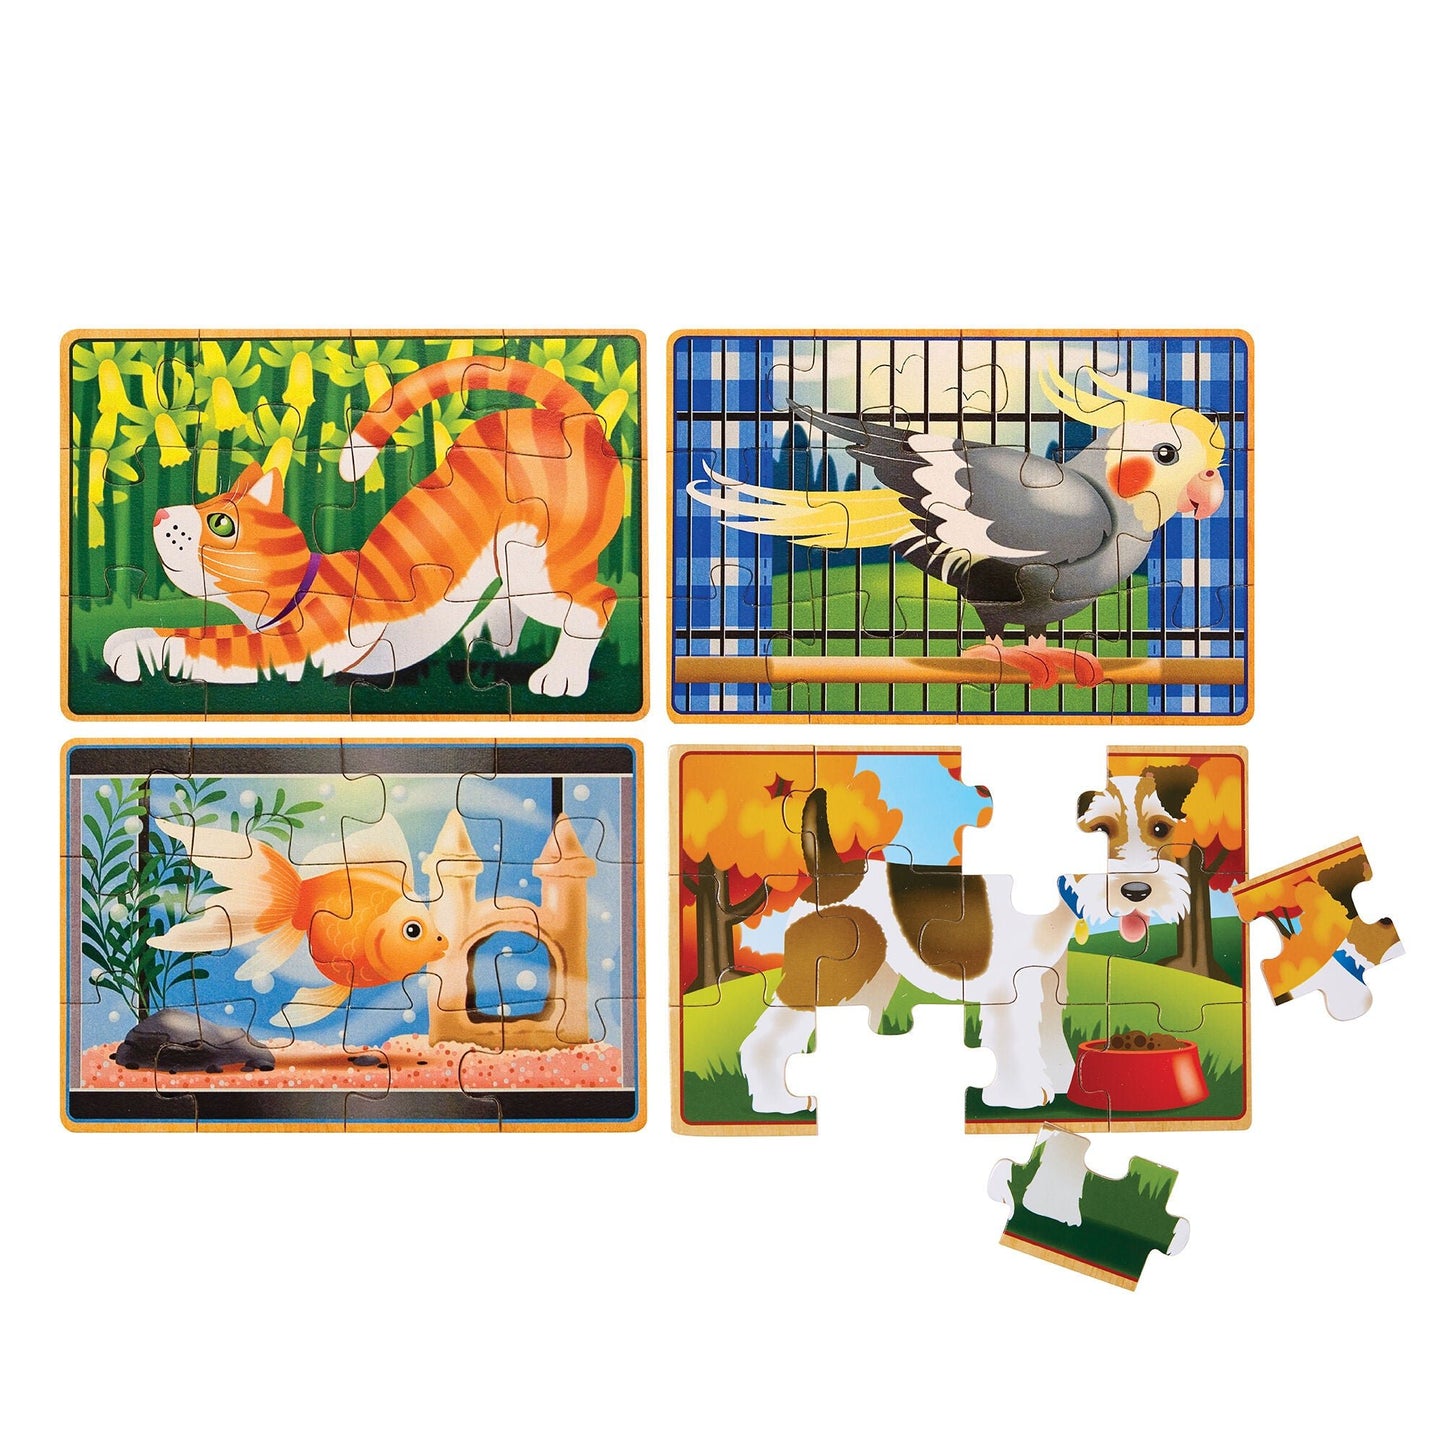 Puzzle - Pets Jigsaw Puzzles in a Box